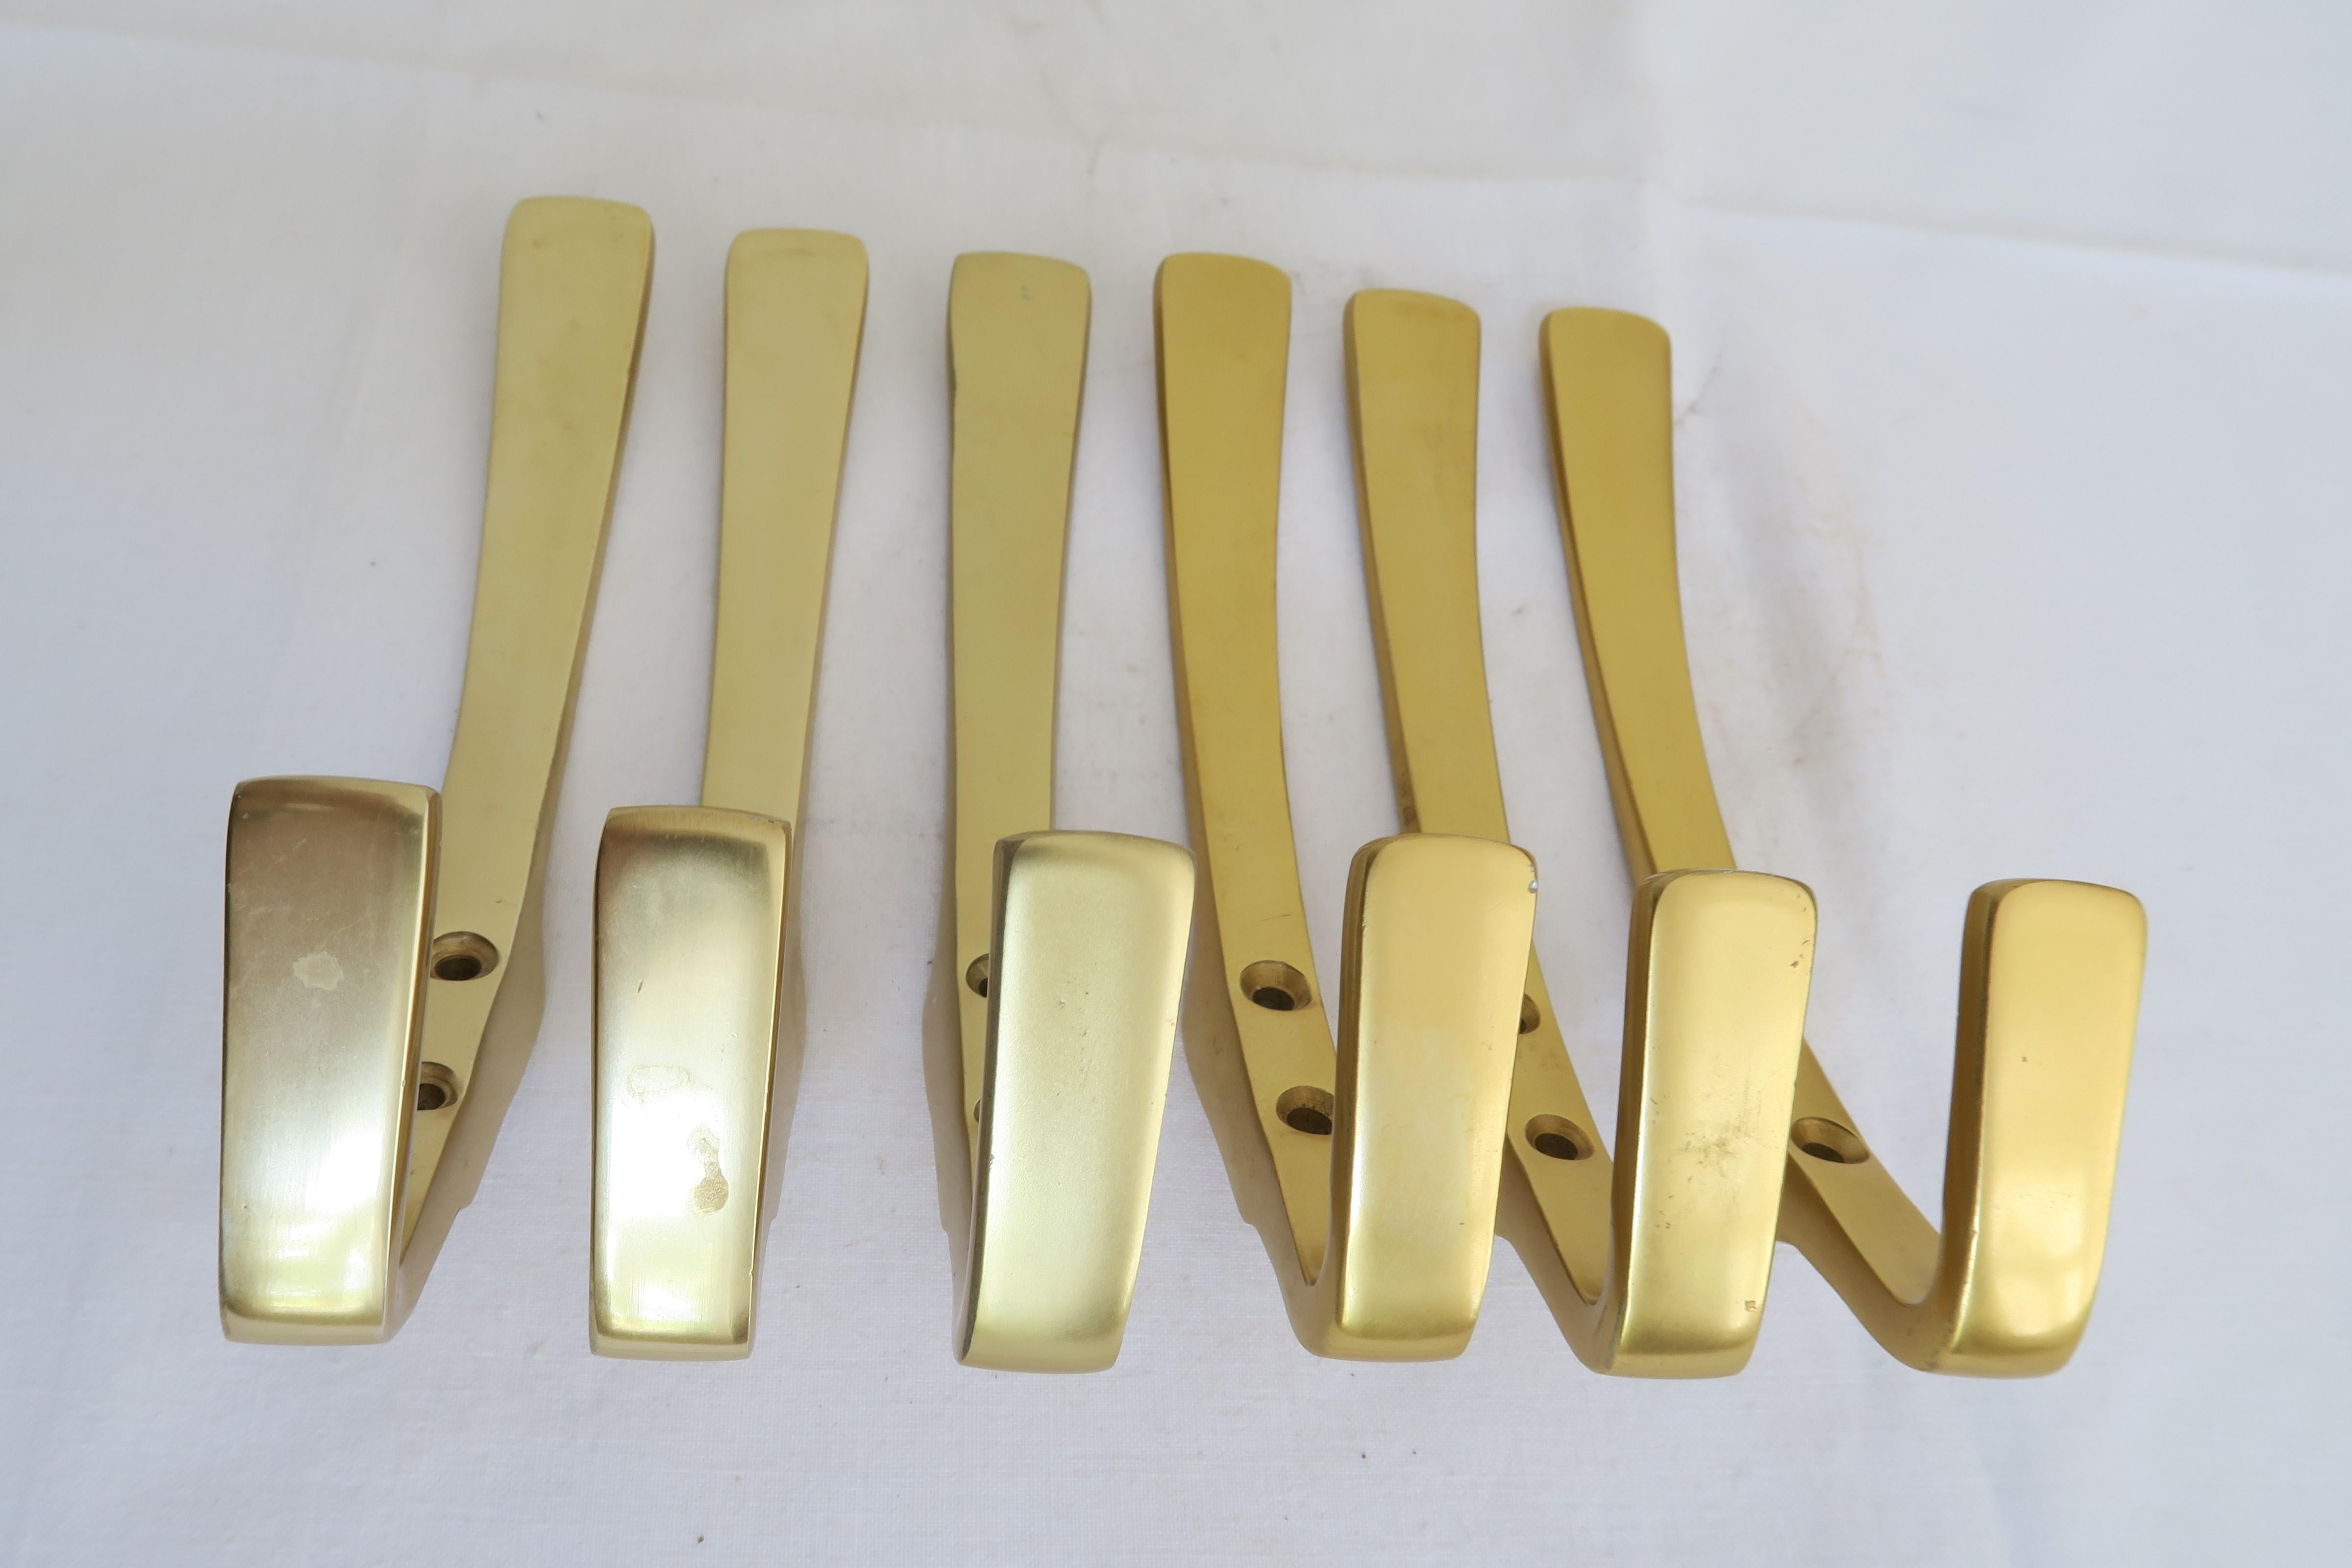 For sale is a set of 6 gold-colored aluminum coat hooks. The hooks can be wall mounted and are similar in style to Carl Auböcks designs. Half of the hooks are a slightly more warm gold tone than the other half, so they could either be mounted